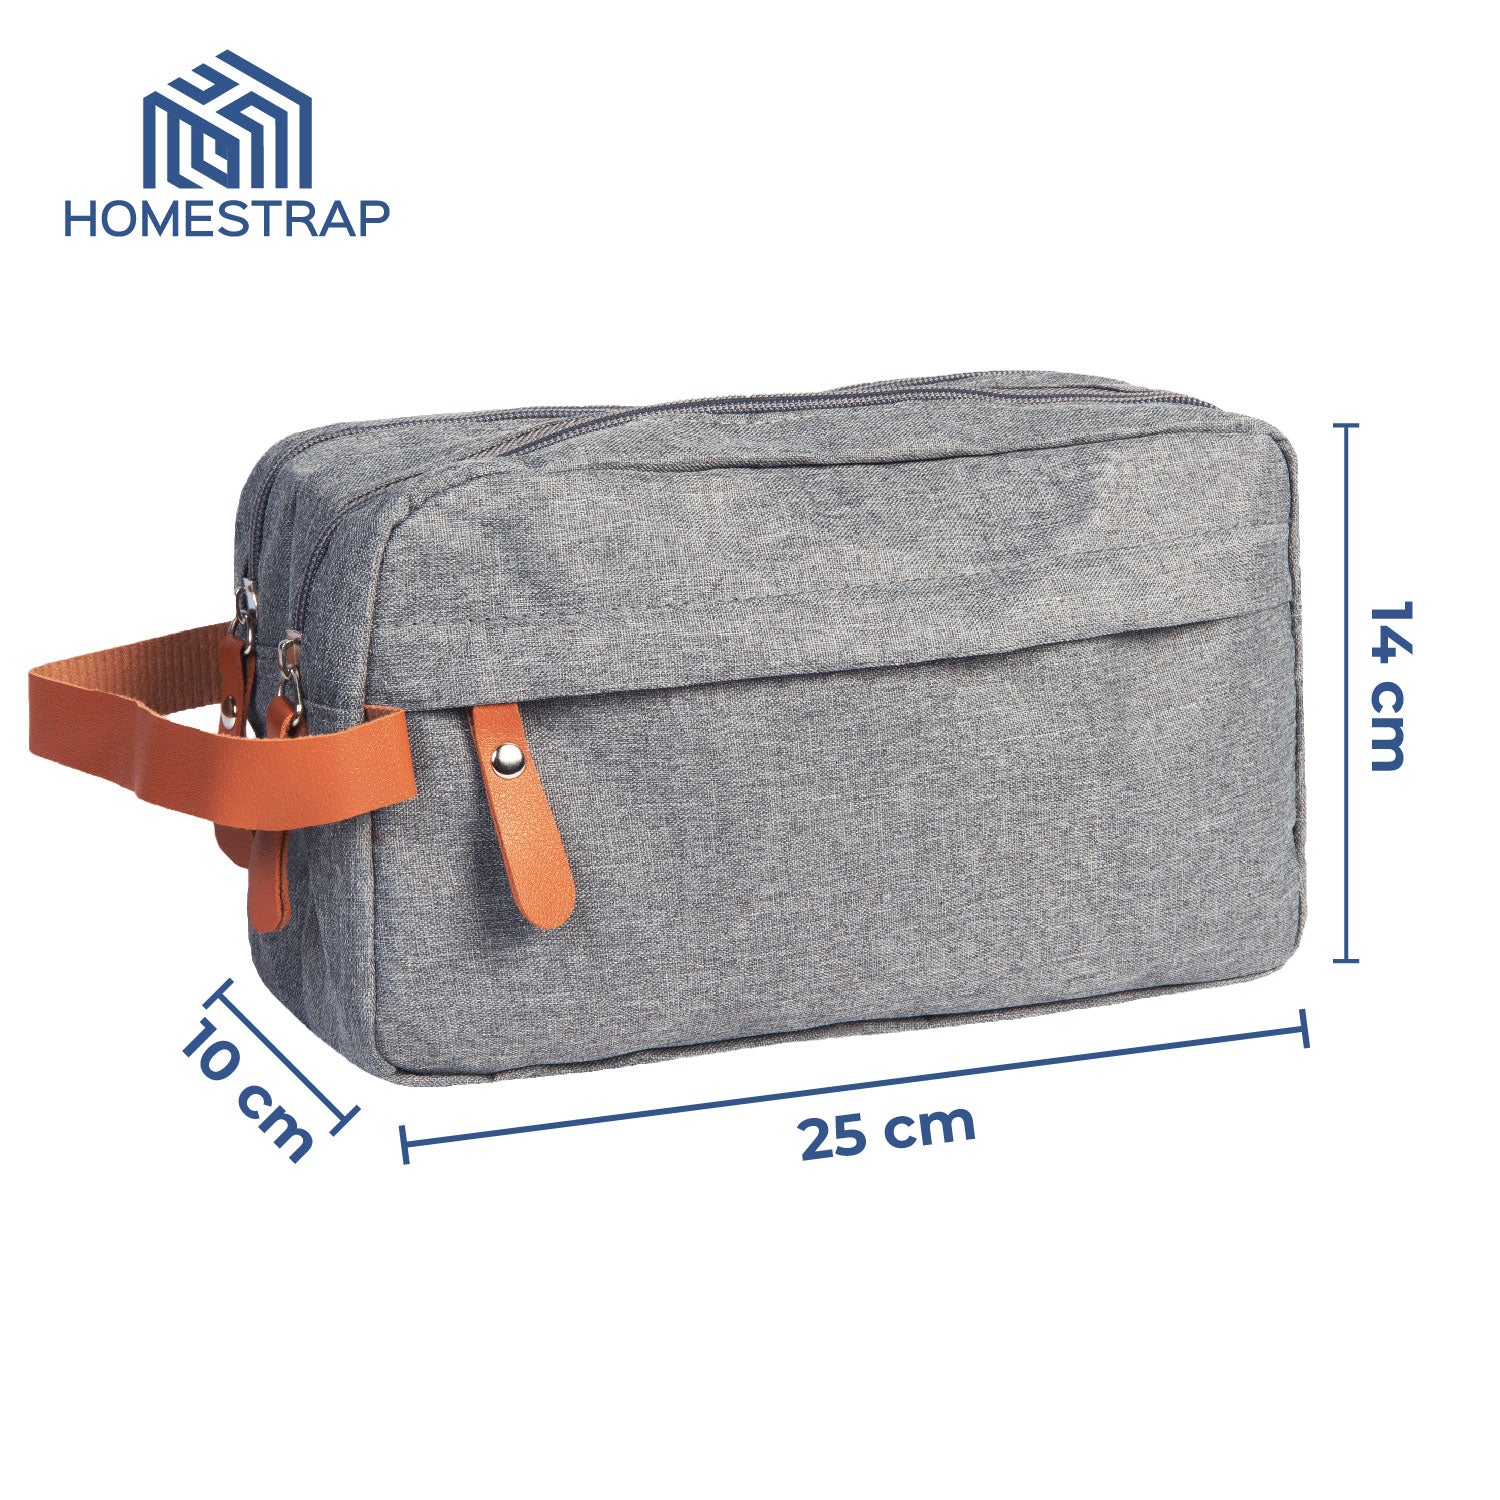 Clean Carry All | Travel Toiletry Organizer Bag, Shaving Pouch